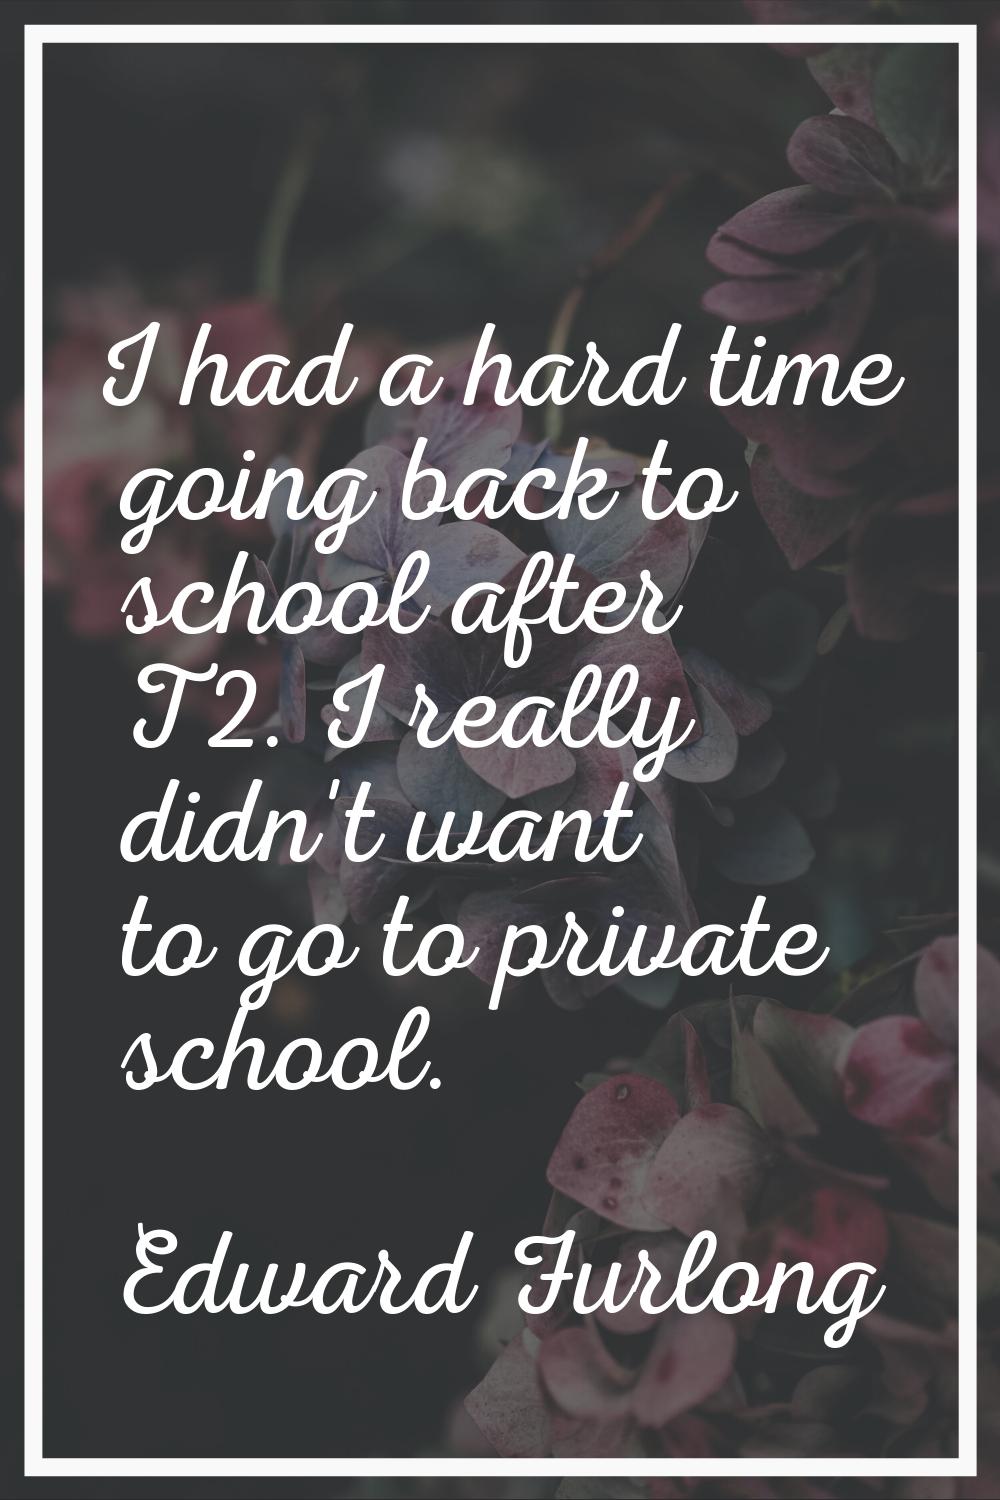 I had a hard time going back to school after T2. I really didn't want to go to private school.